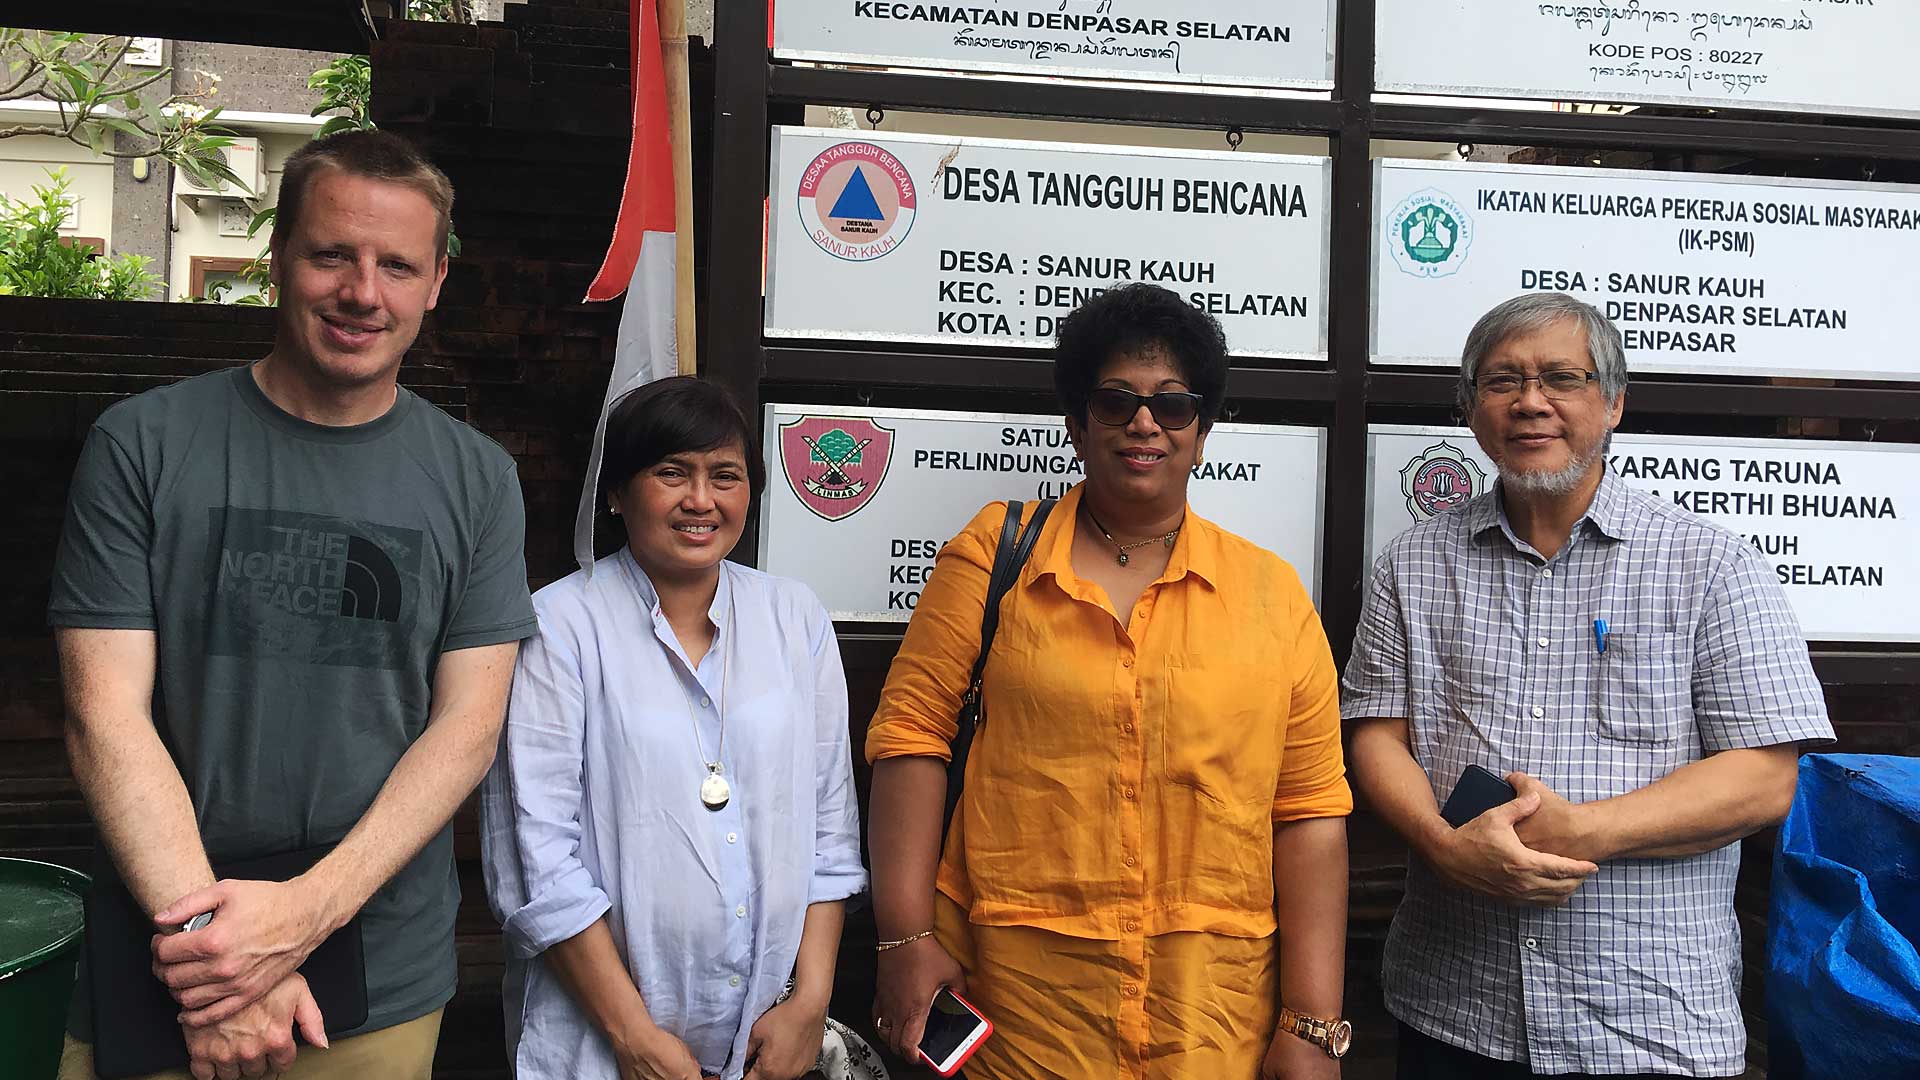 The researchers visiting Indonesia